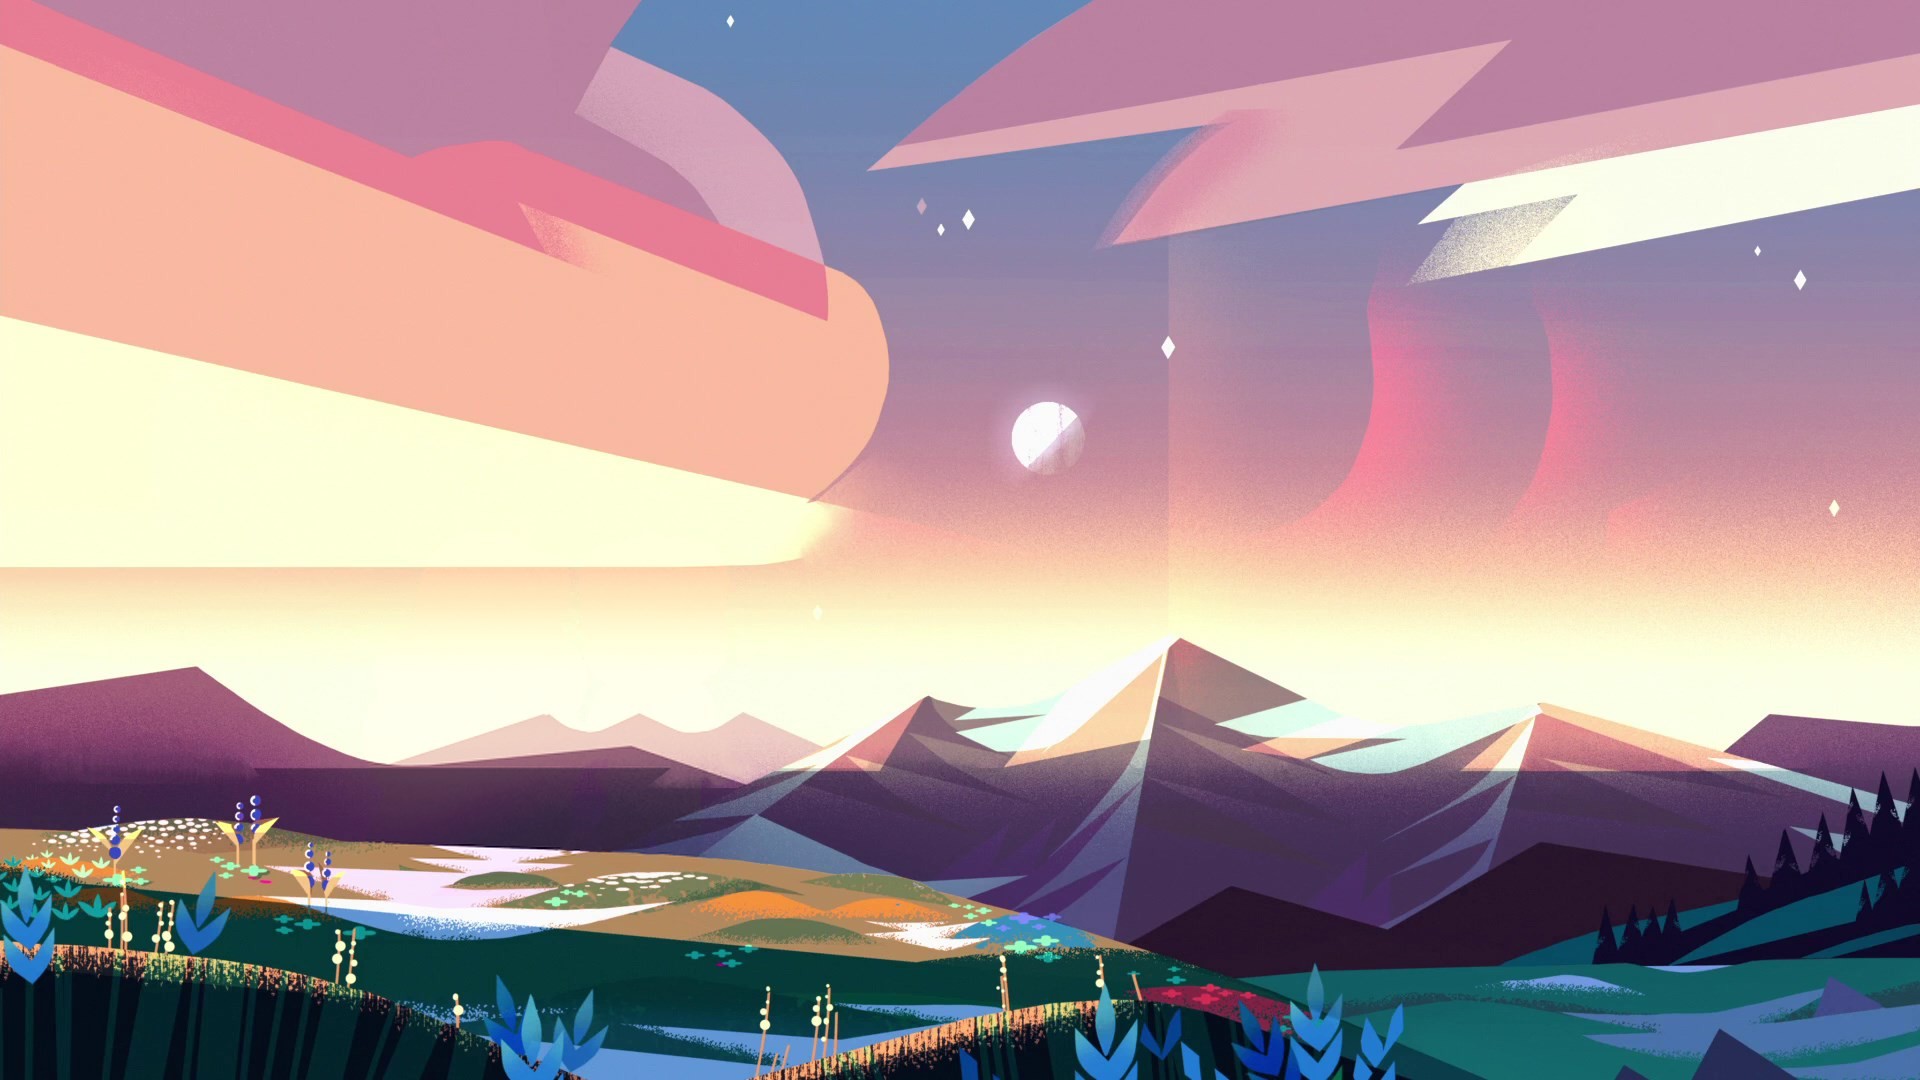 Px steven universe picture High Definition Backgrounds by Mansfield Peacock